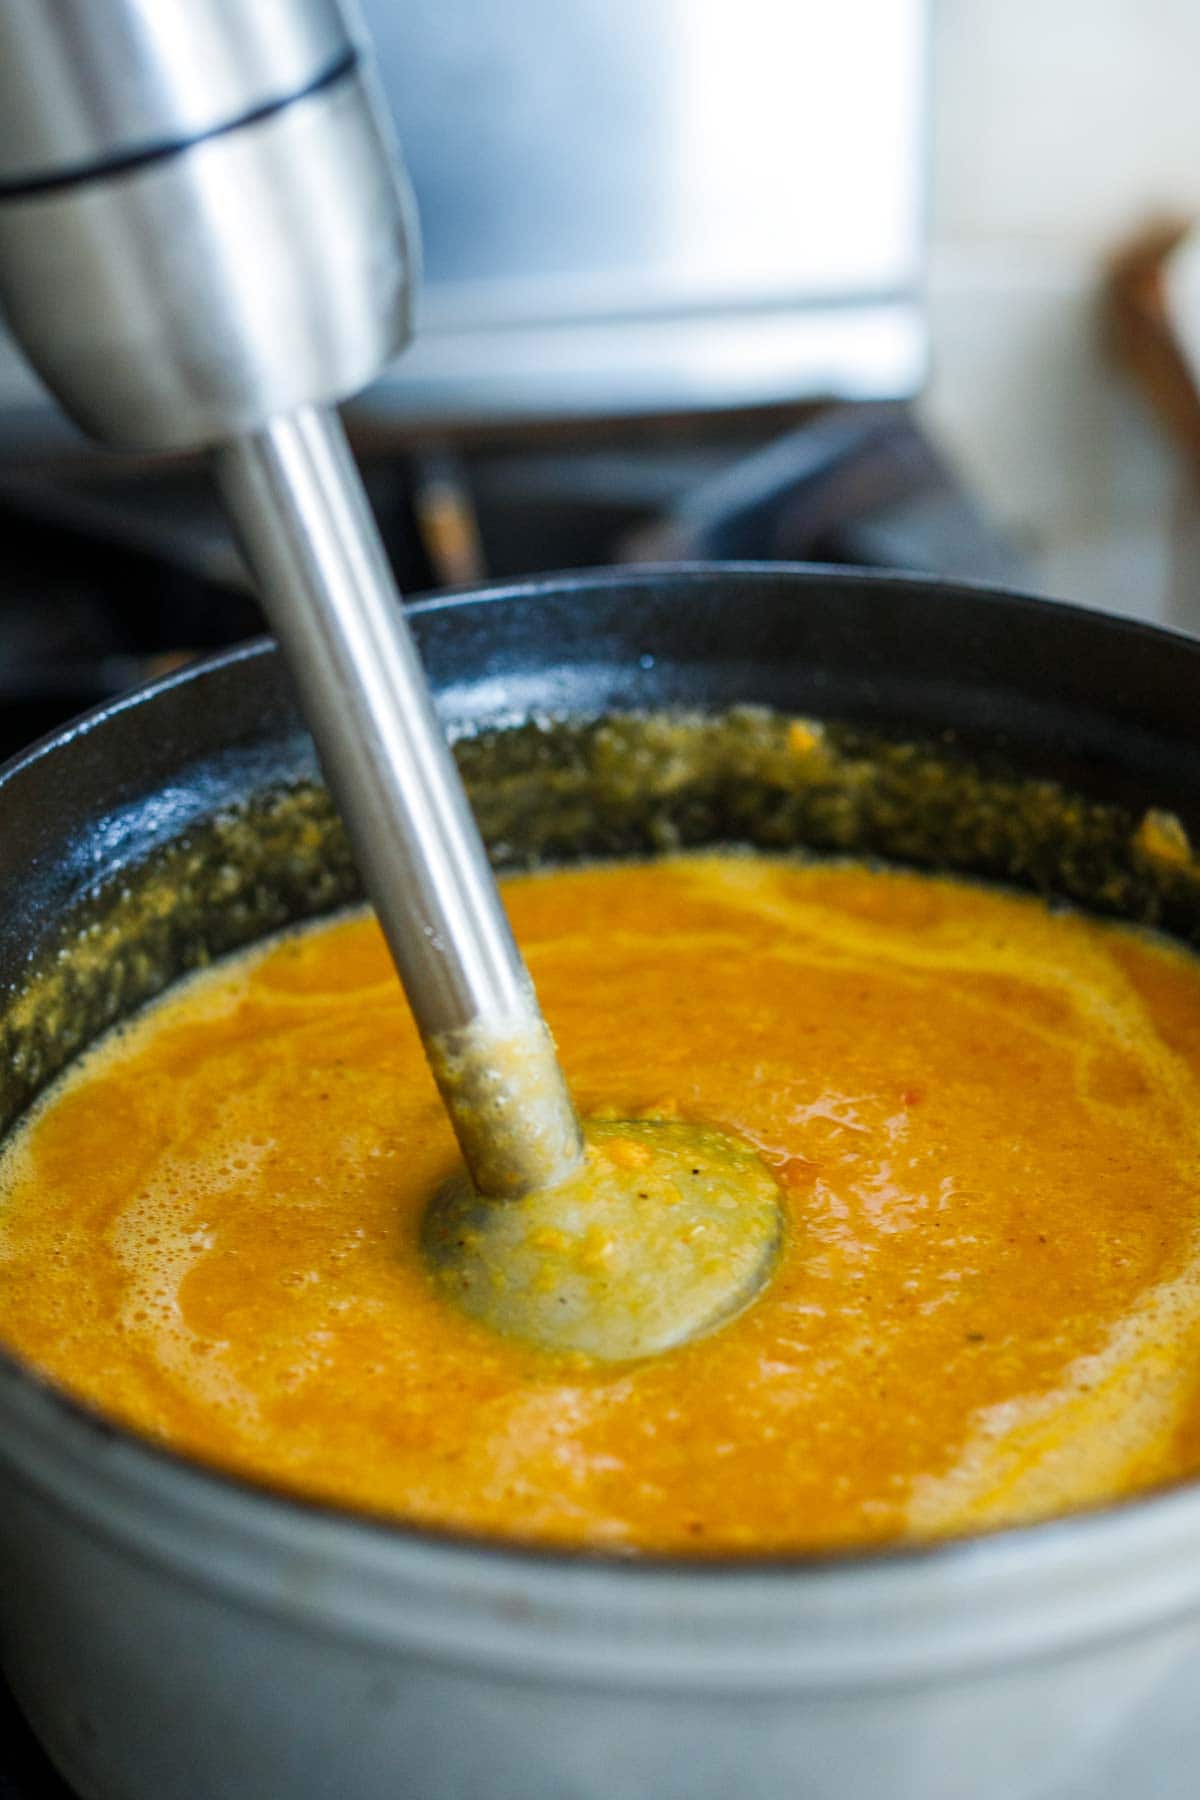 immersion blender pureeing red lentil soup to create creamy texture.